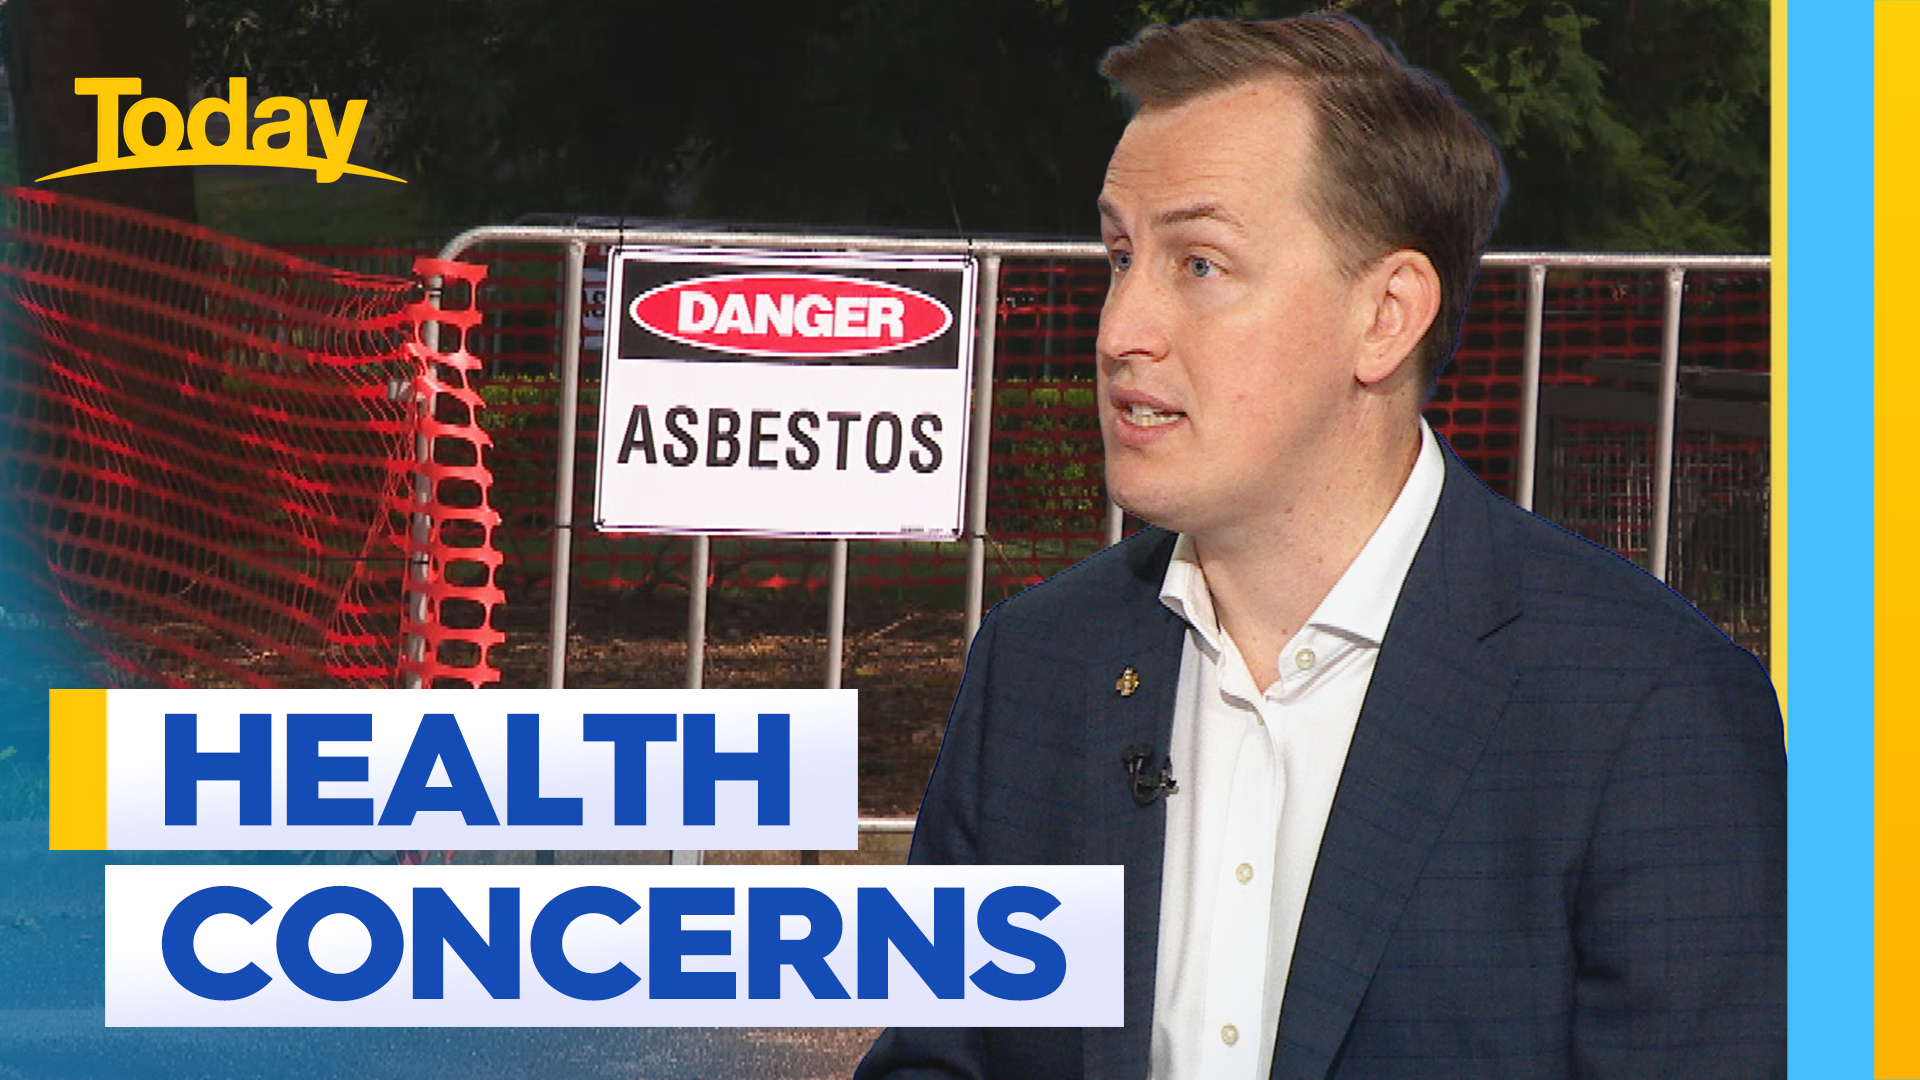 How potential exposure to asbestos could impact your child's health